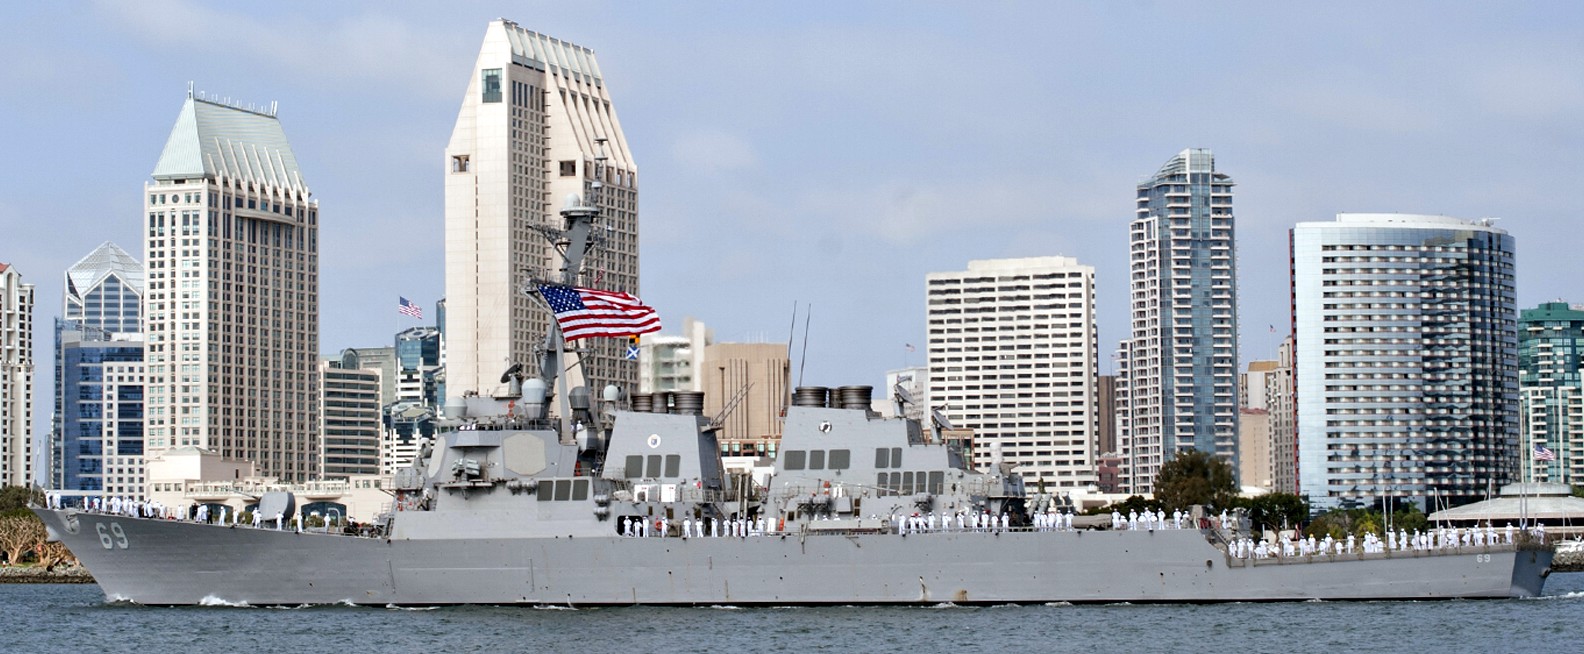 ddg-69 uss milius guided missile destroyer arleigh burke class aegis bmd 20